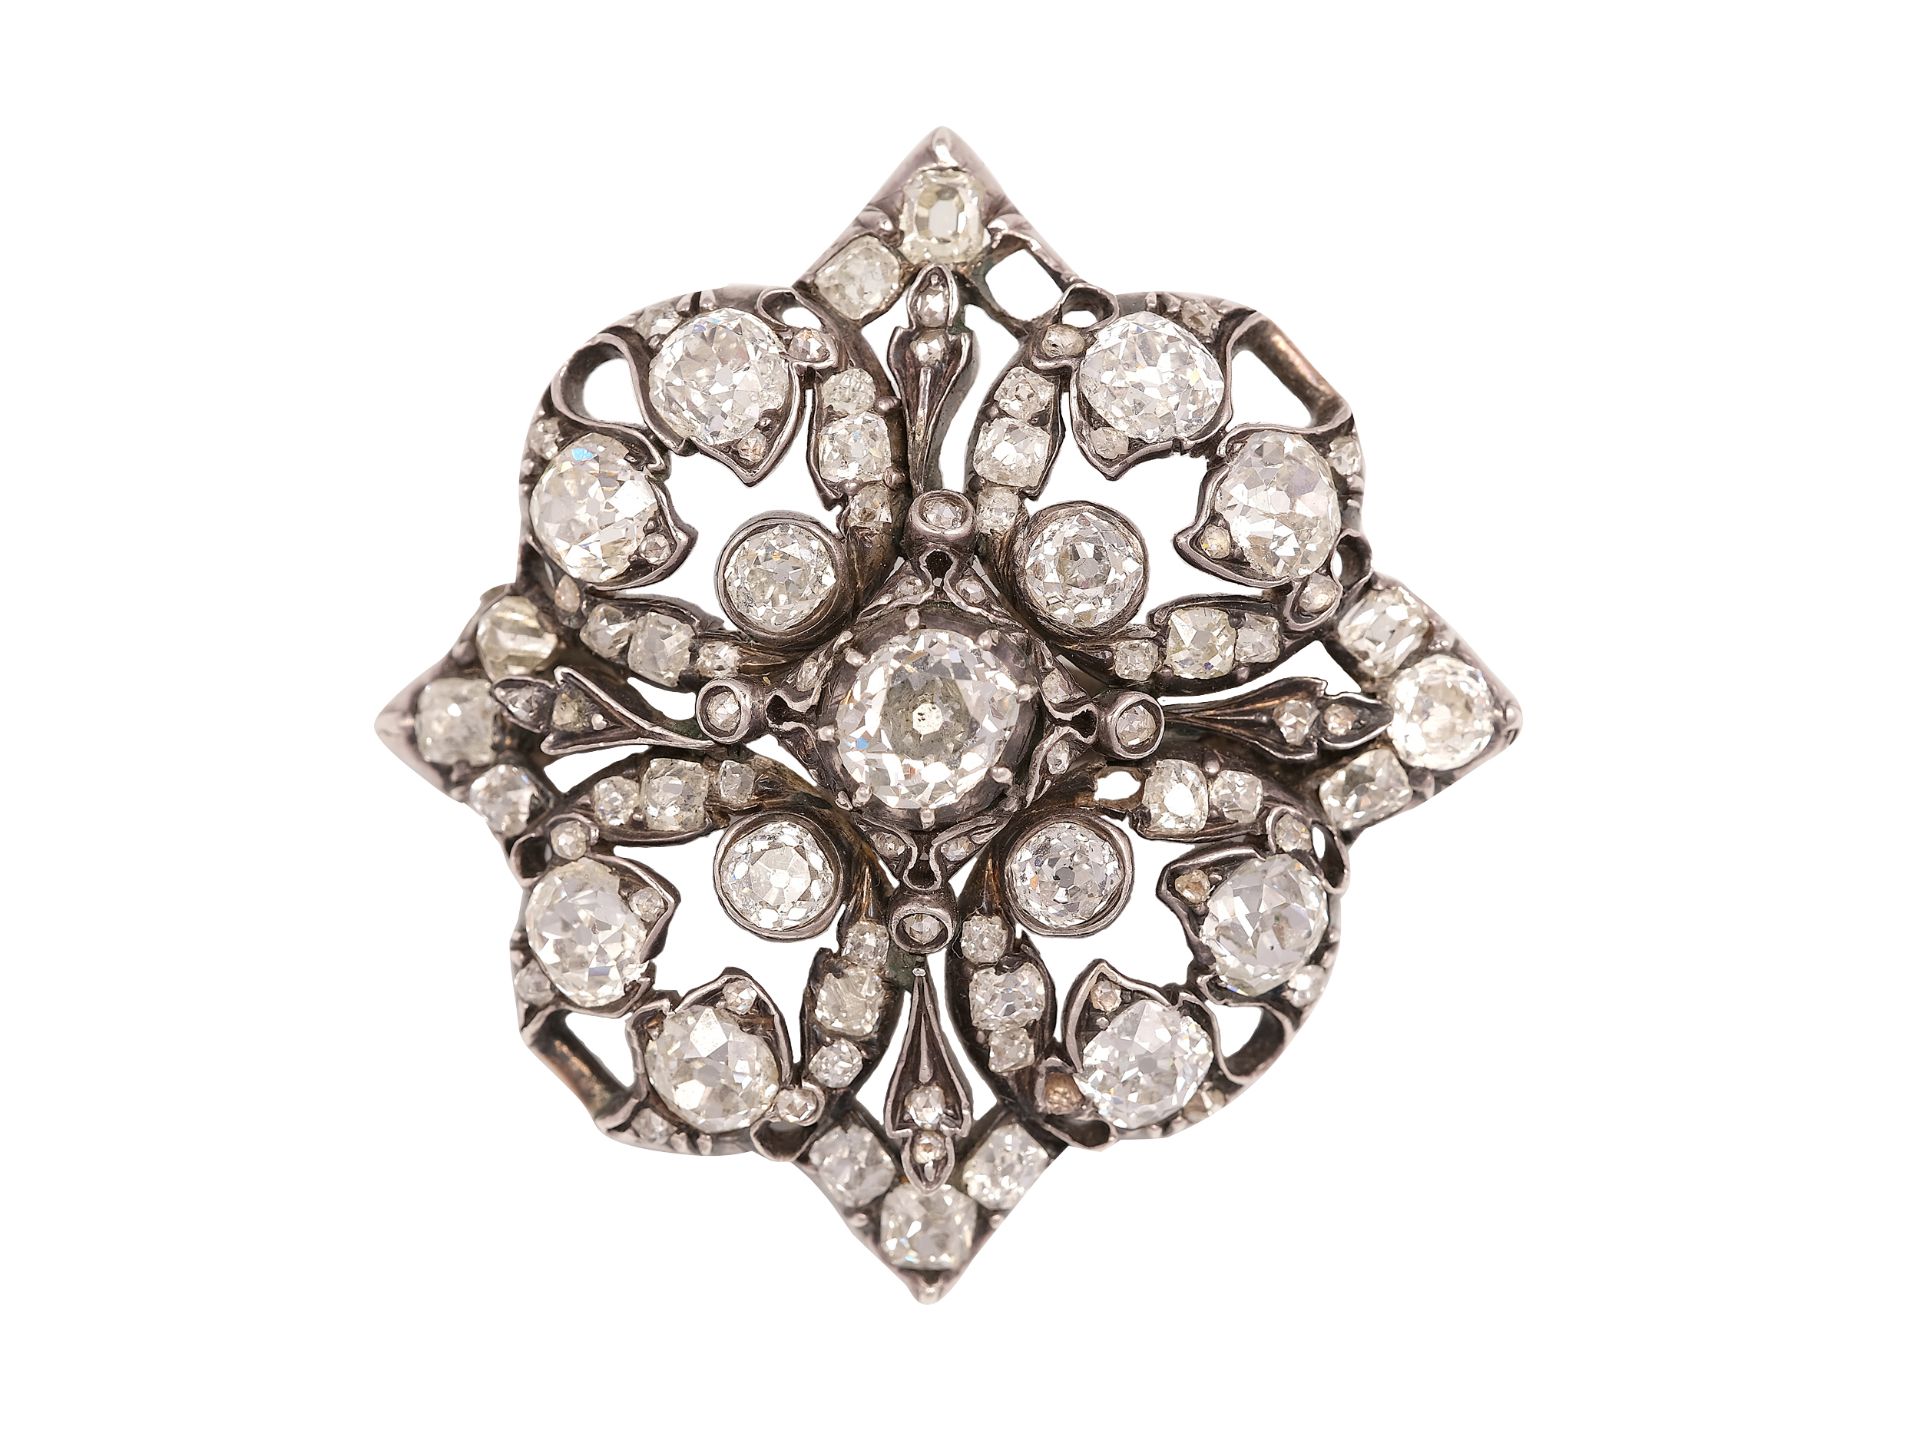 Baroque brooch, Middle 19th century, White gold or silver set - Image 2 of 4